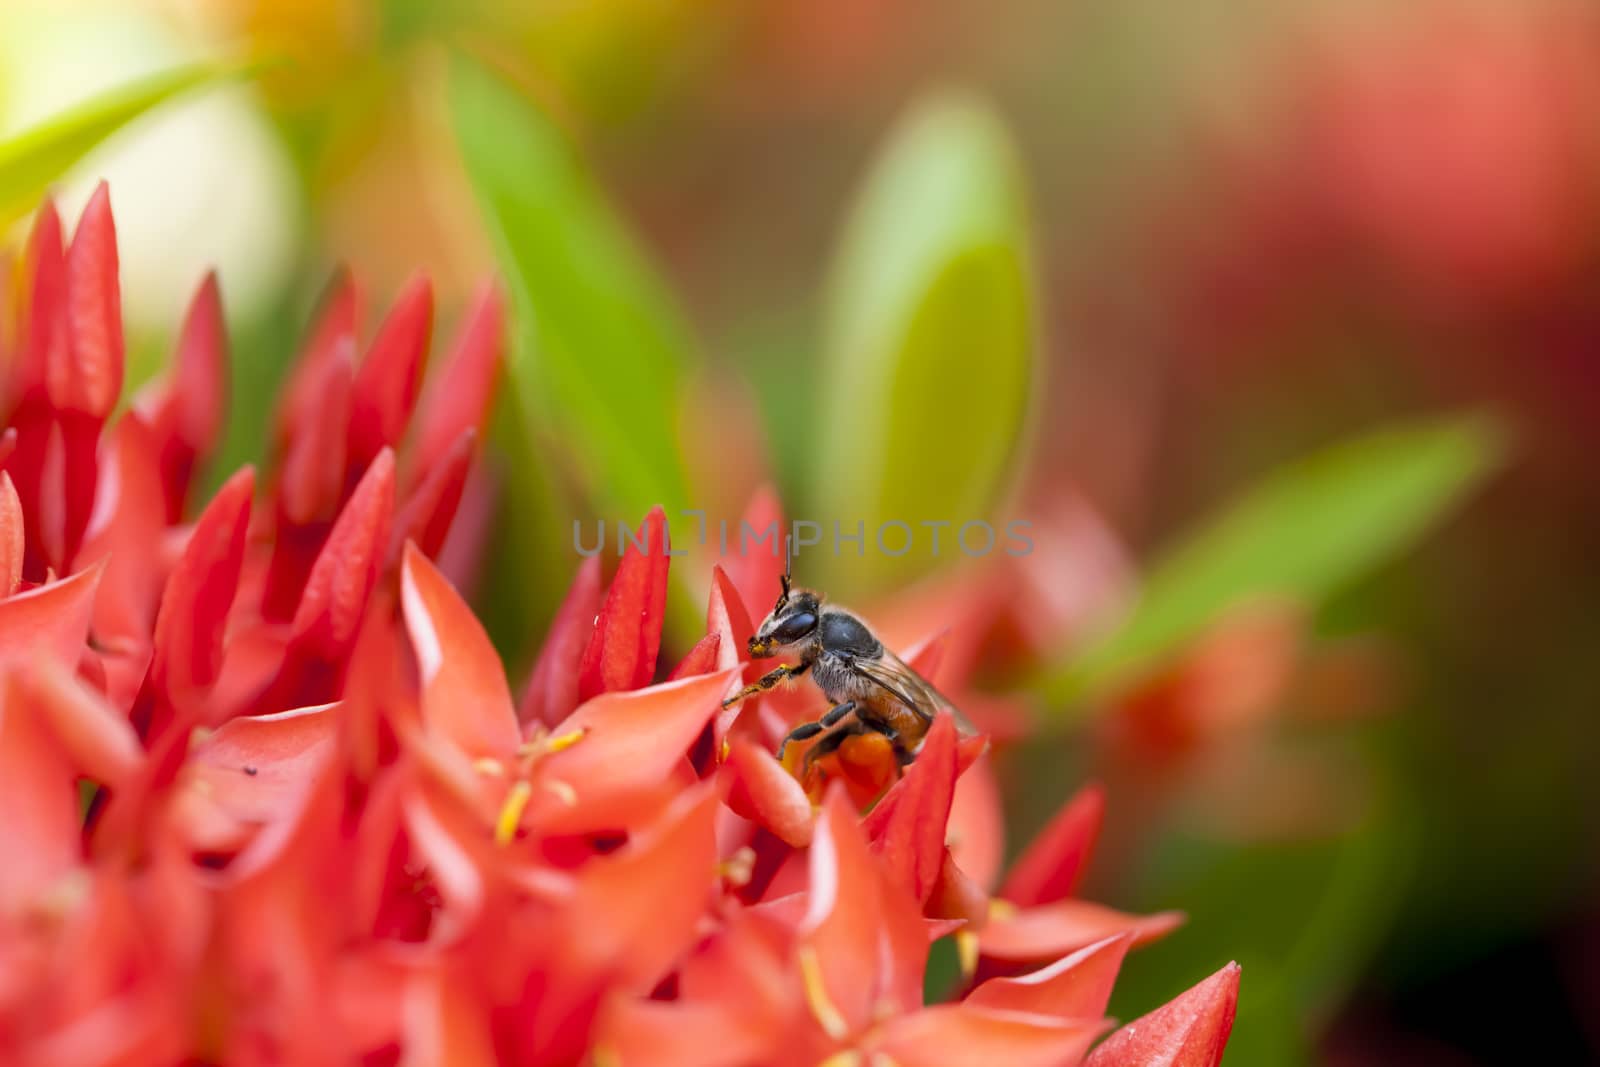 Bees were looking for nectar and pollen of flowers on Ixora